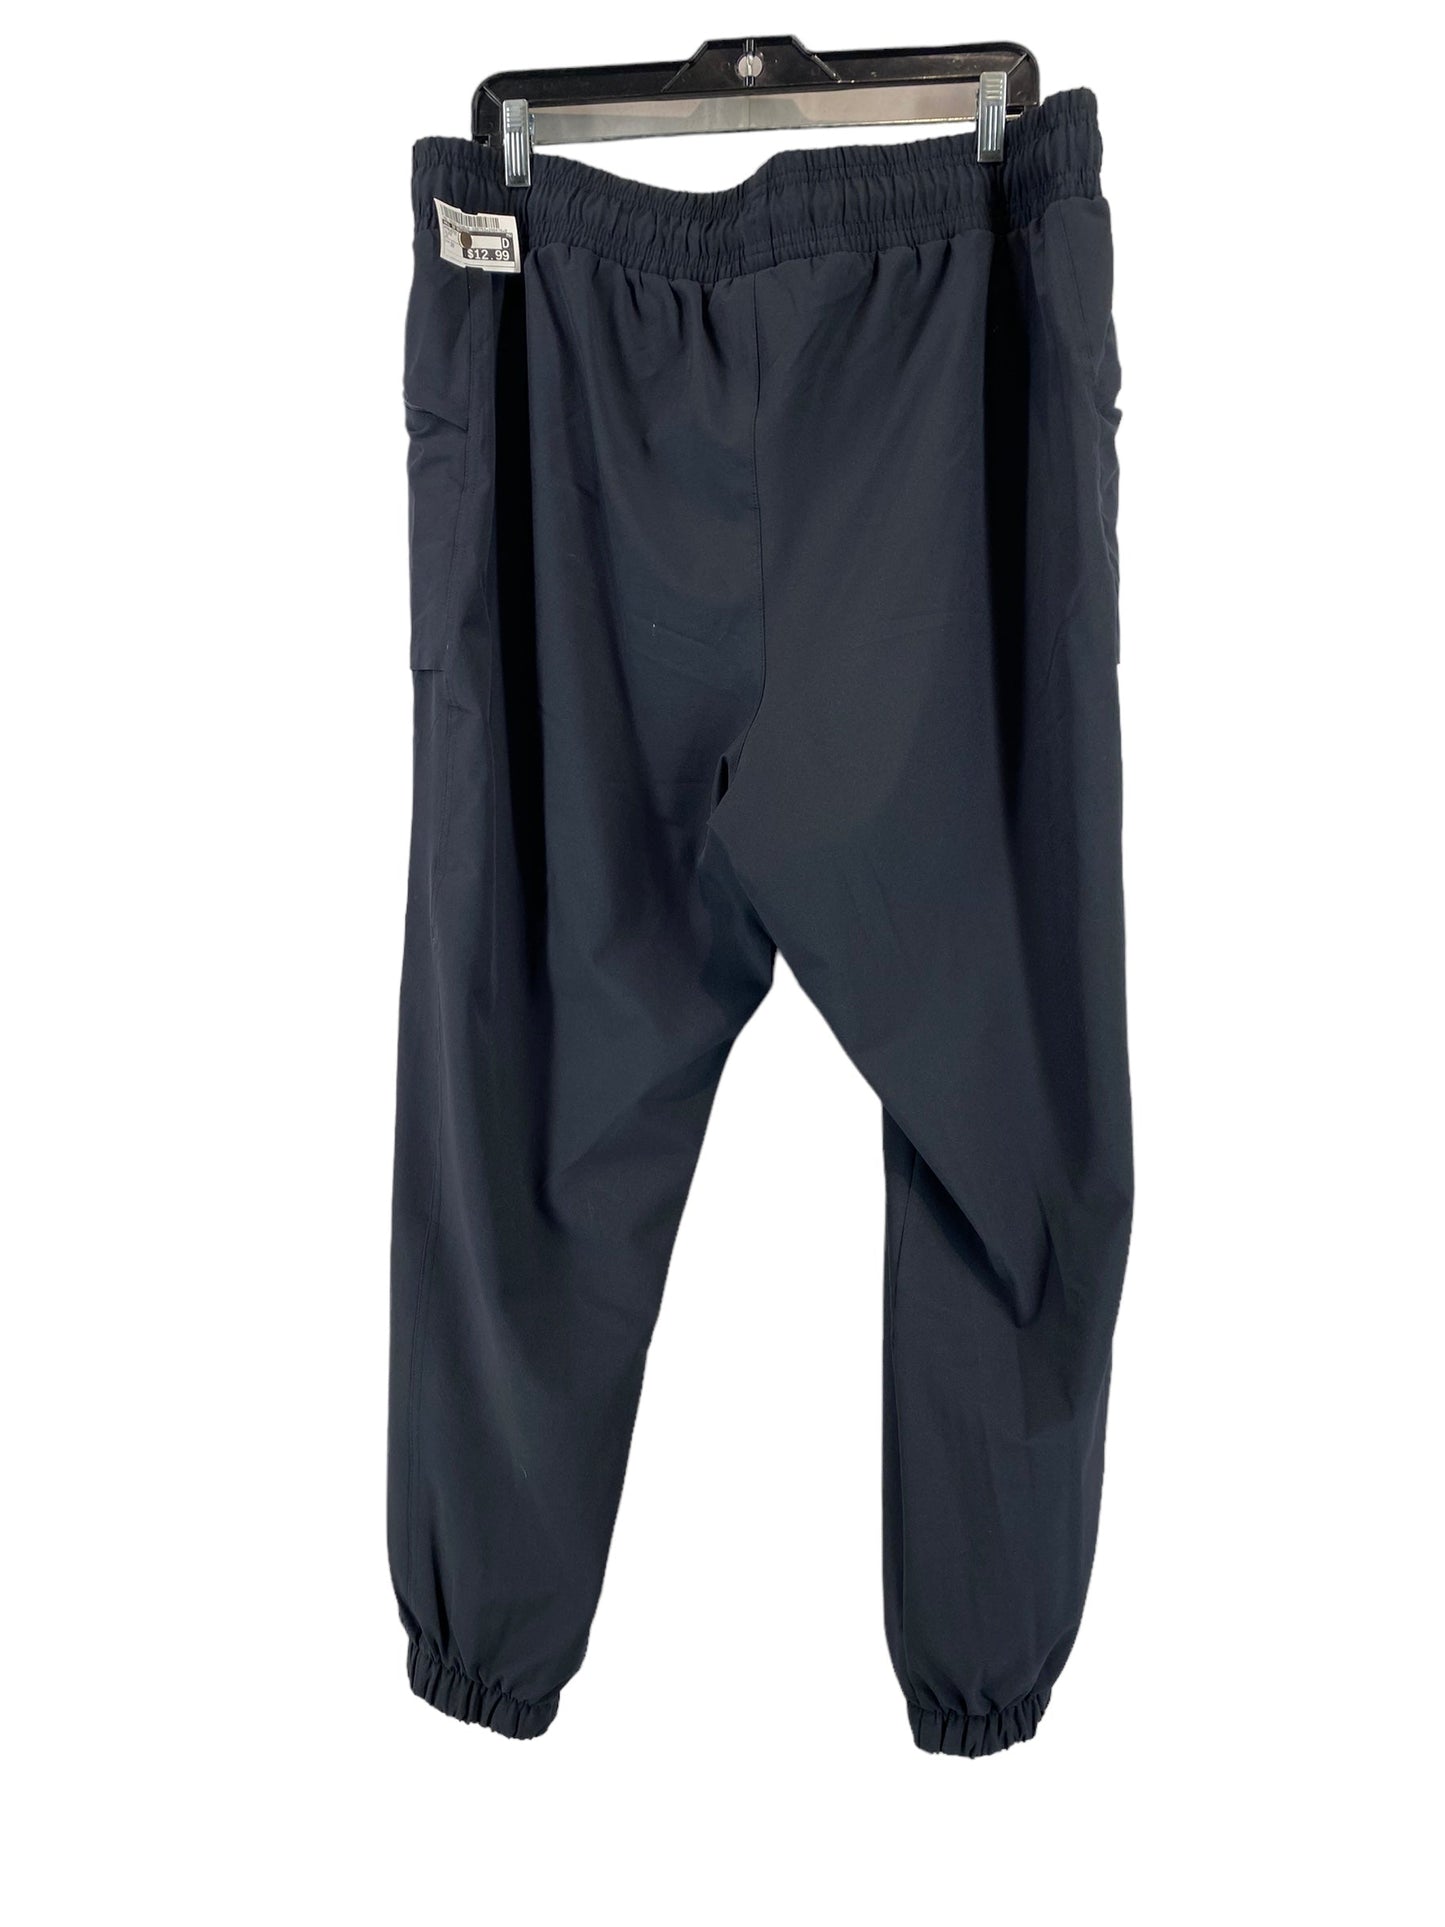 Athletic Pants By All In Motion  Size: 2x